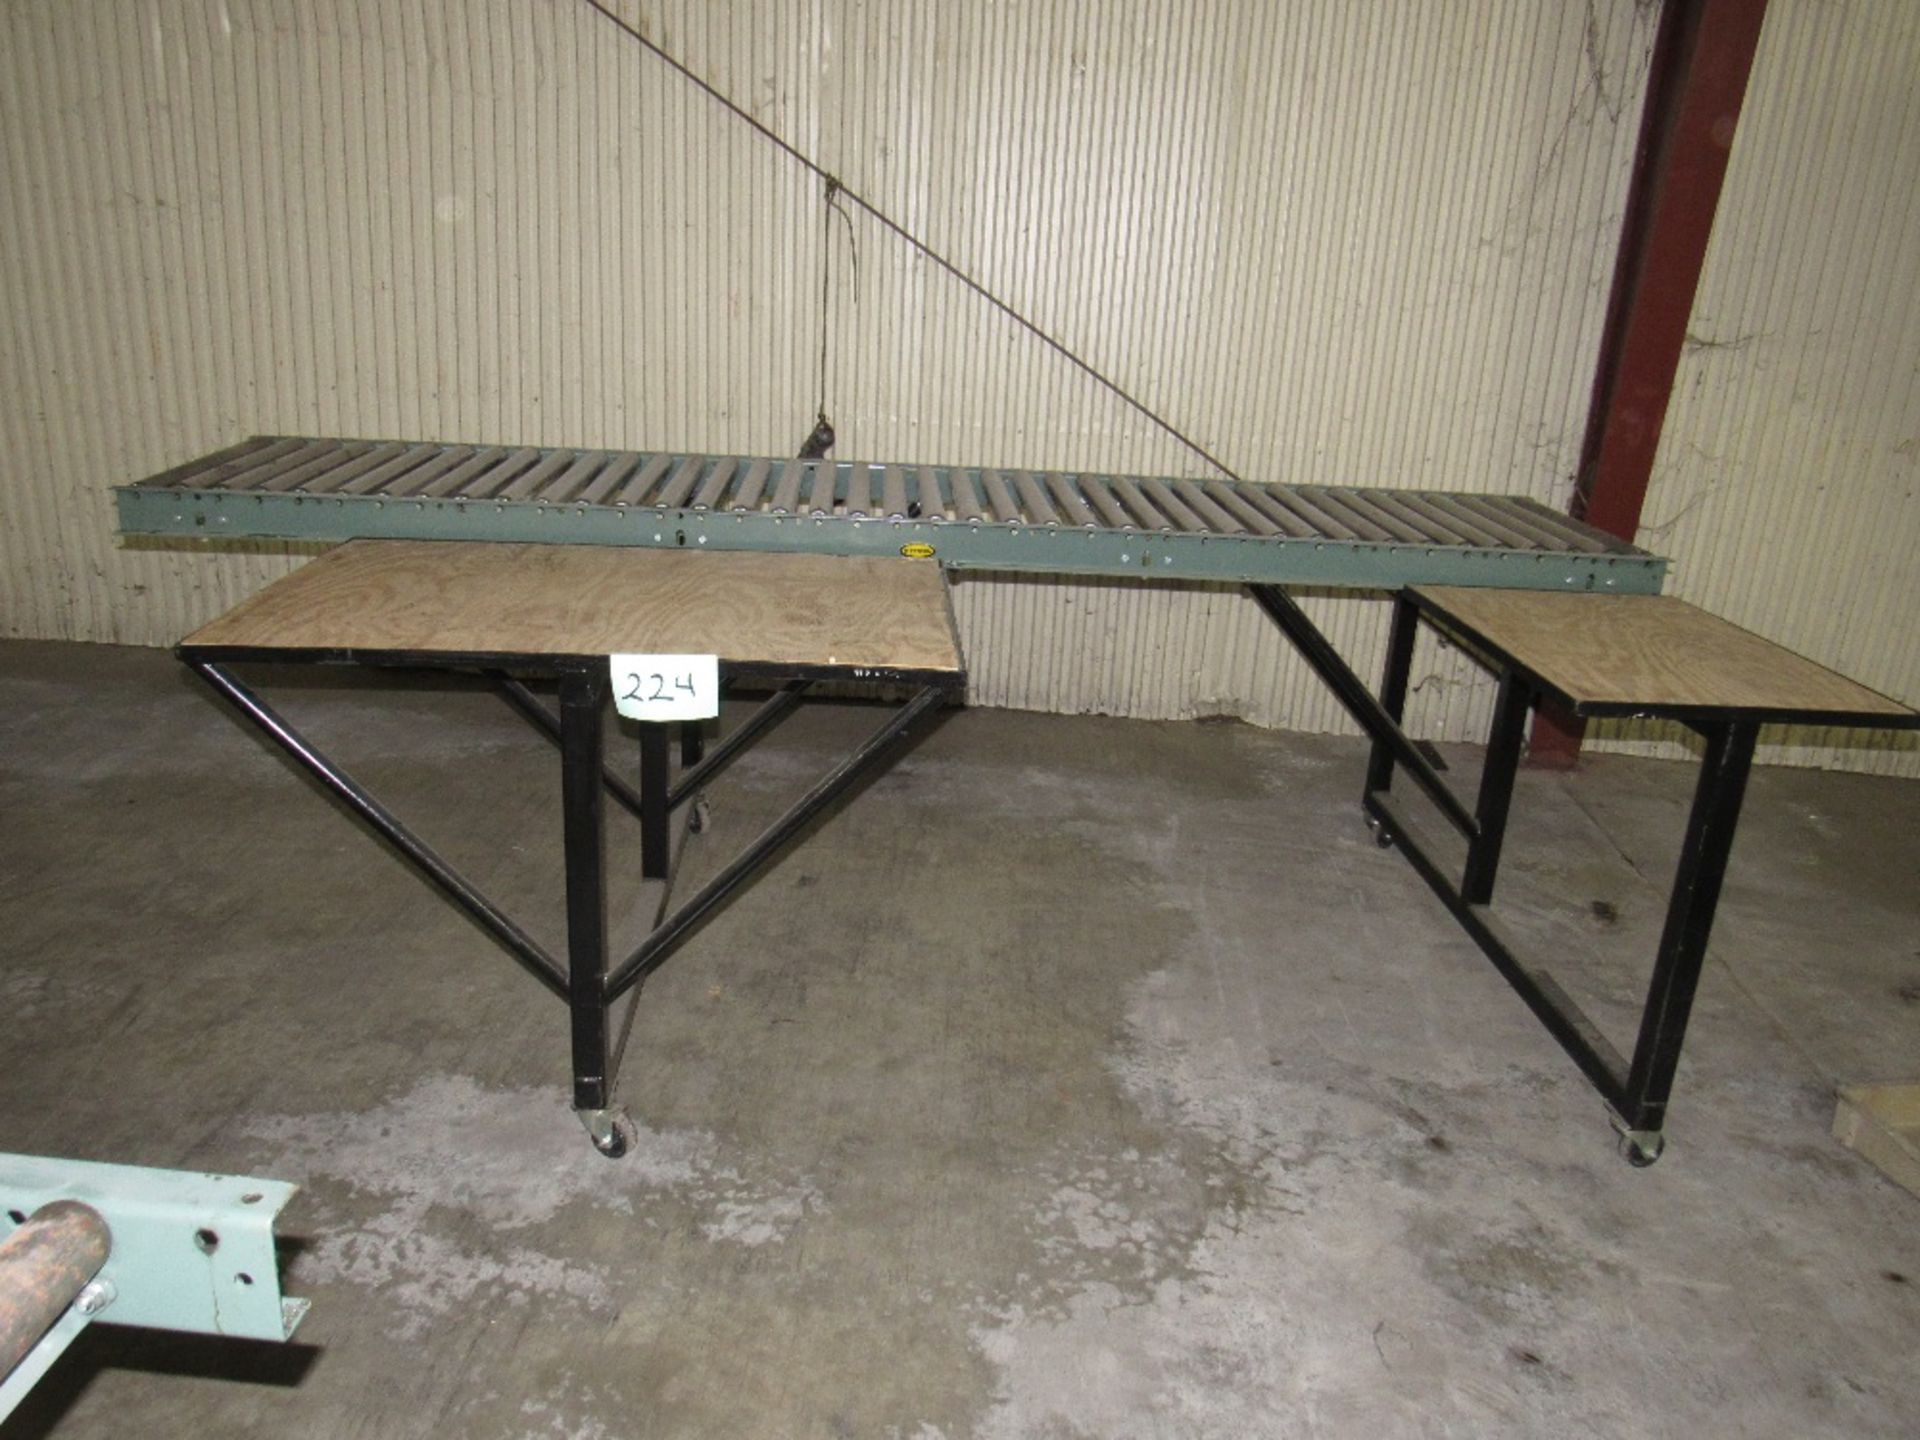 Packing Table with 10ft Hydrol Roller conveyor and two work surface with plywood tops on casters,